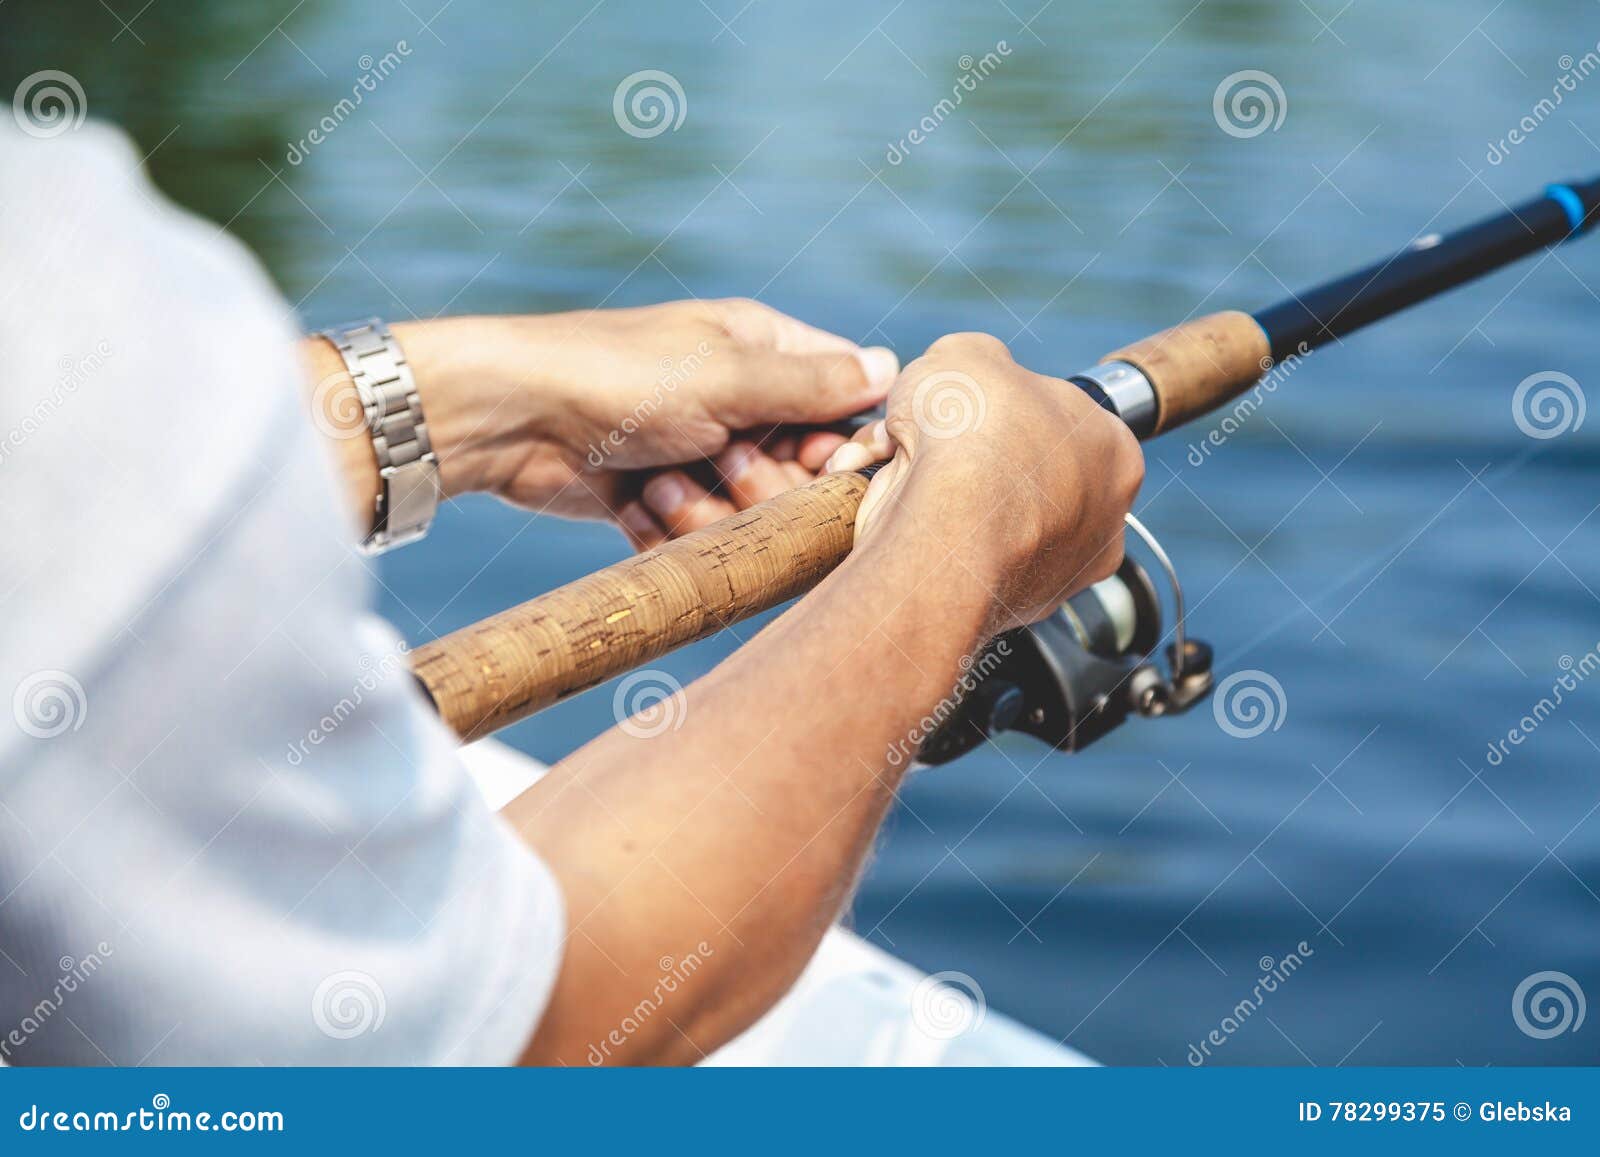 Hands Fisherman Holding Fishing Rod and Reel Handle is Rotated